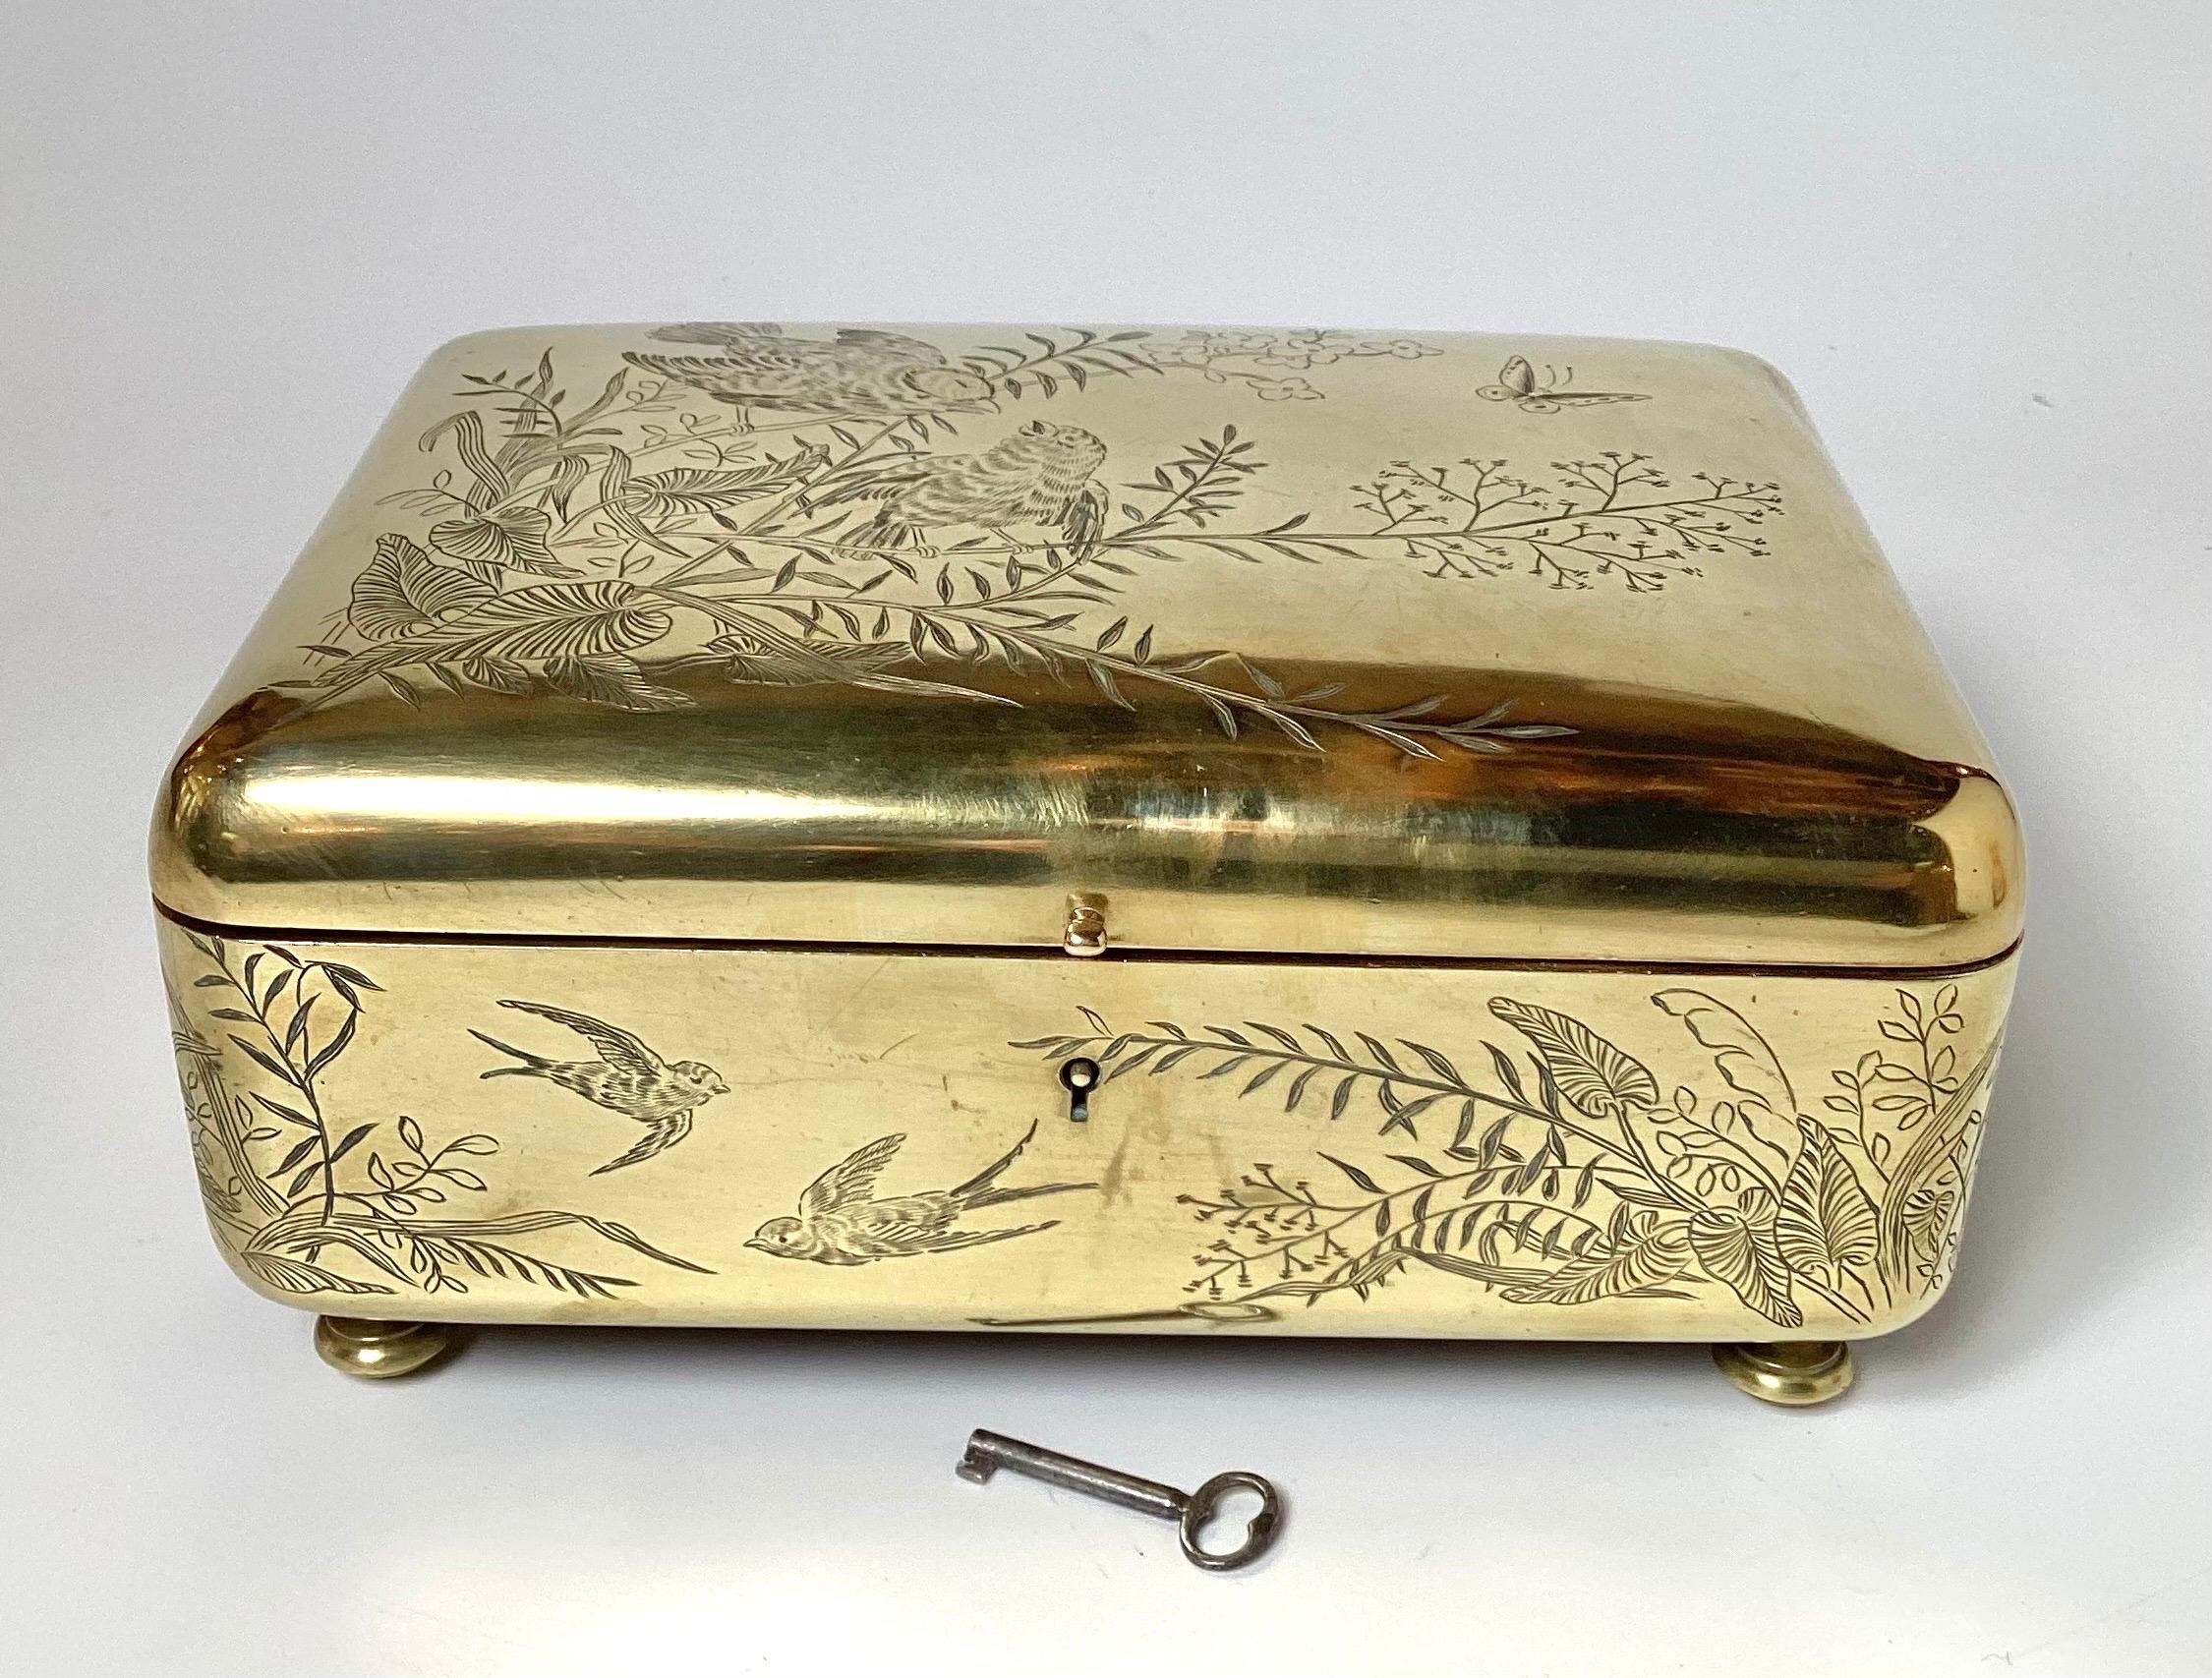 A polished brass Aesthetic movement engraved decoration jewelry box, table box. The bright finish with love birds, leaves, branches and vines with a working key. The velvet lining is in good condition but original with some fading.